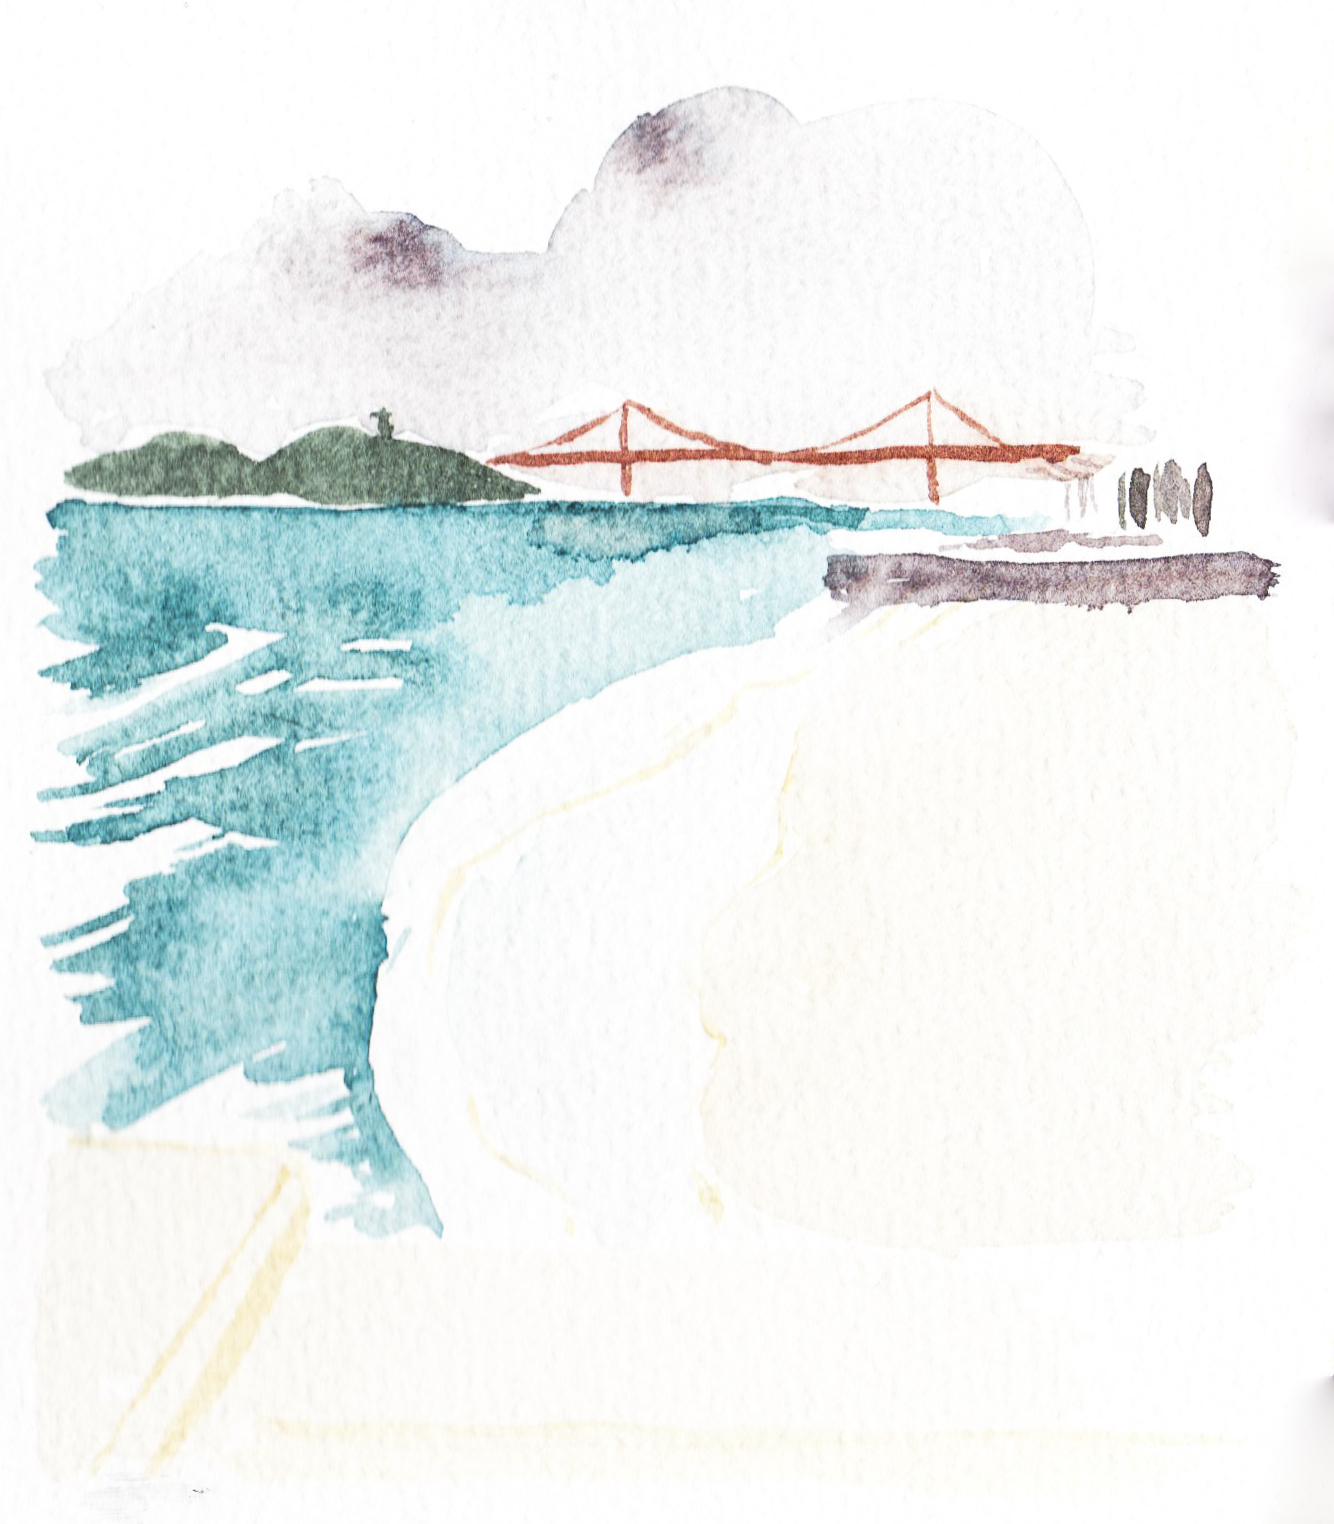 Watercolor painting of The 25th April Bridge in Lisbon